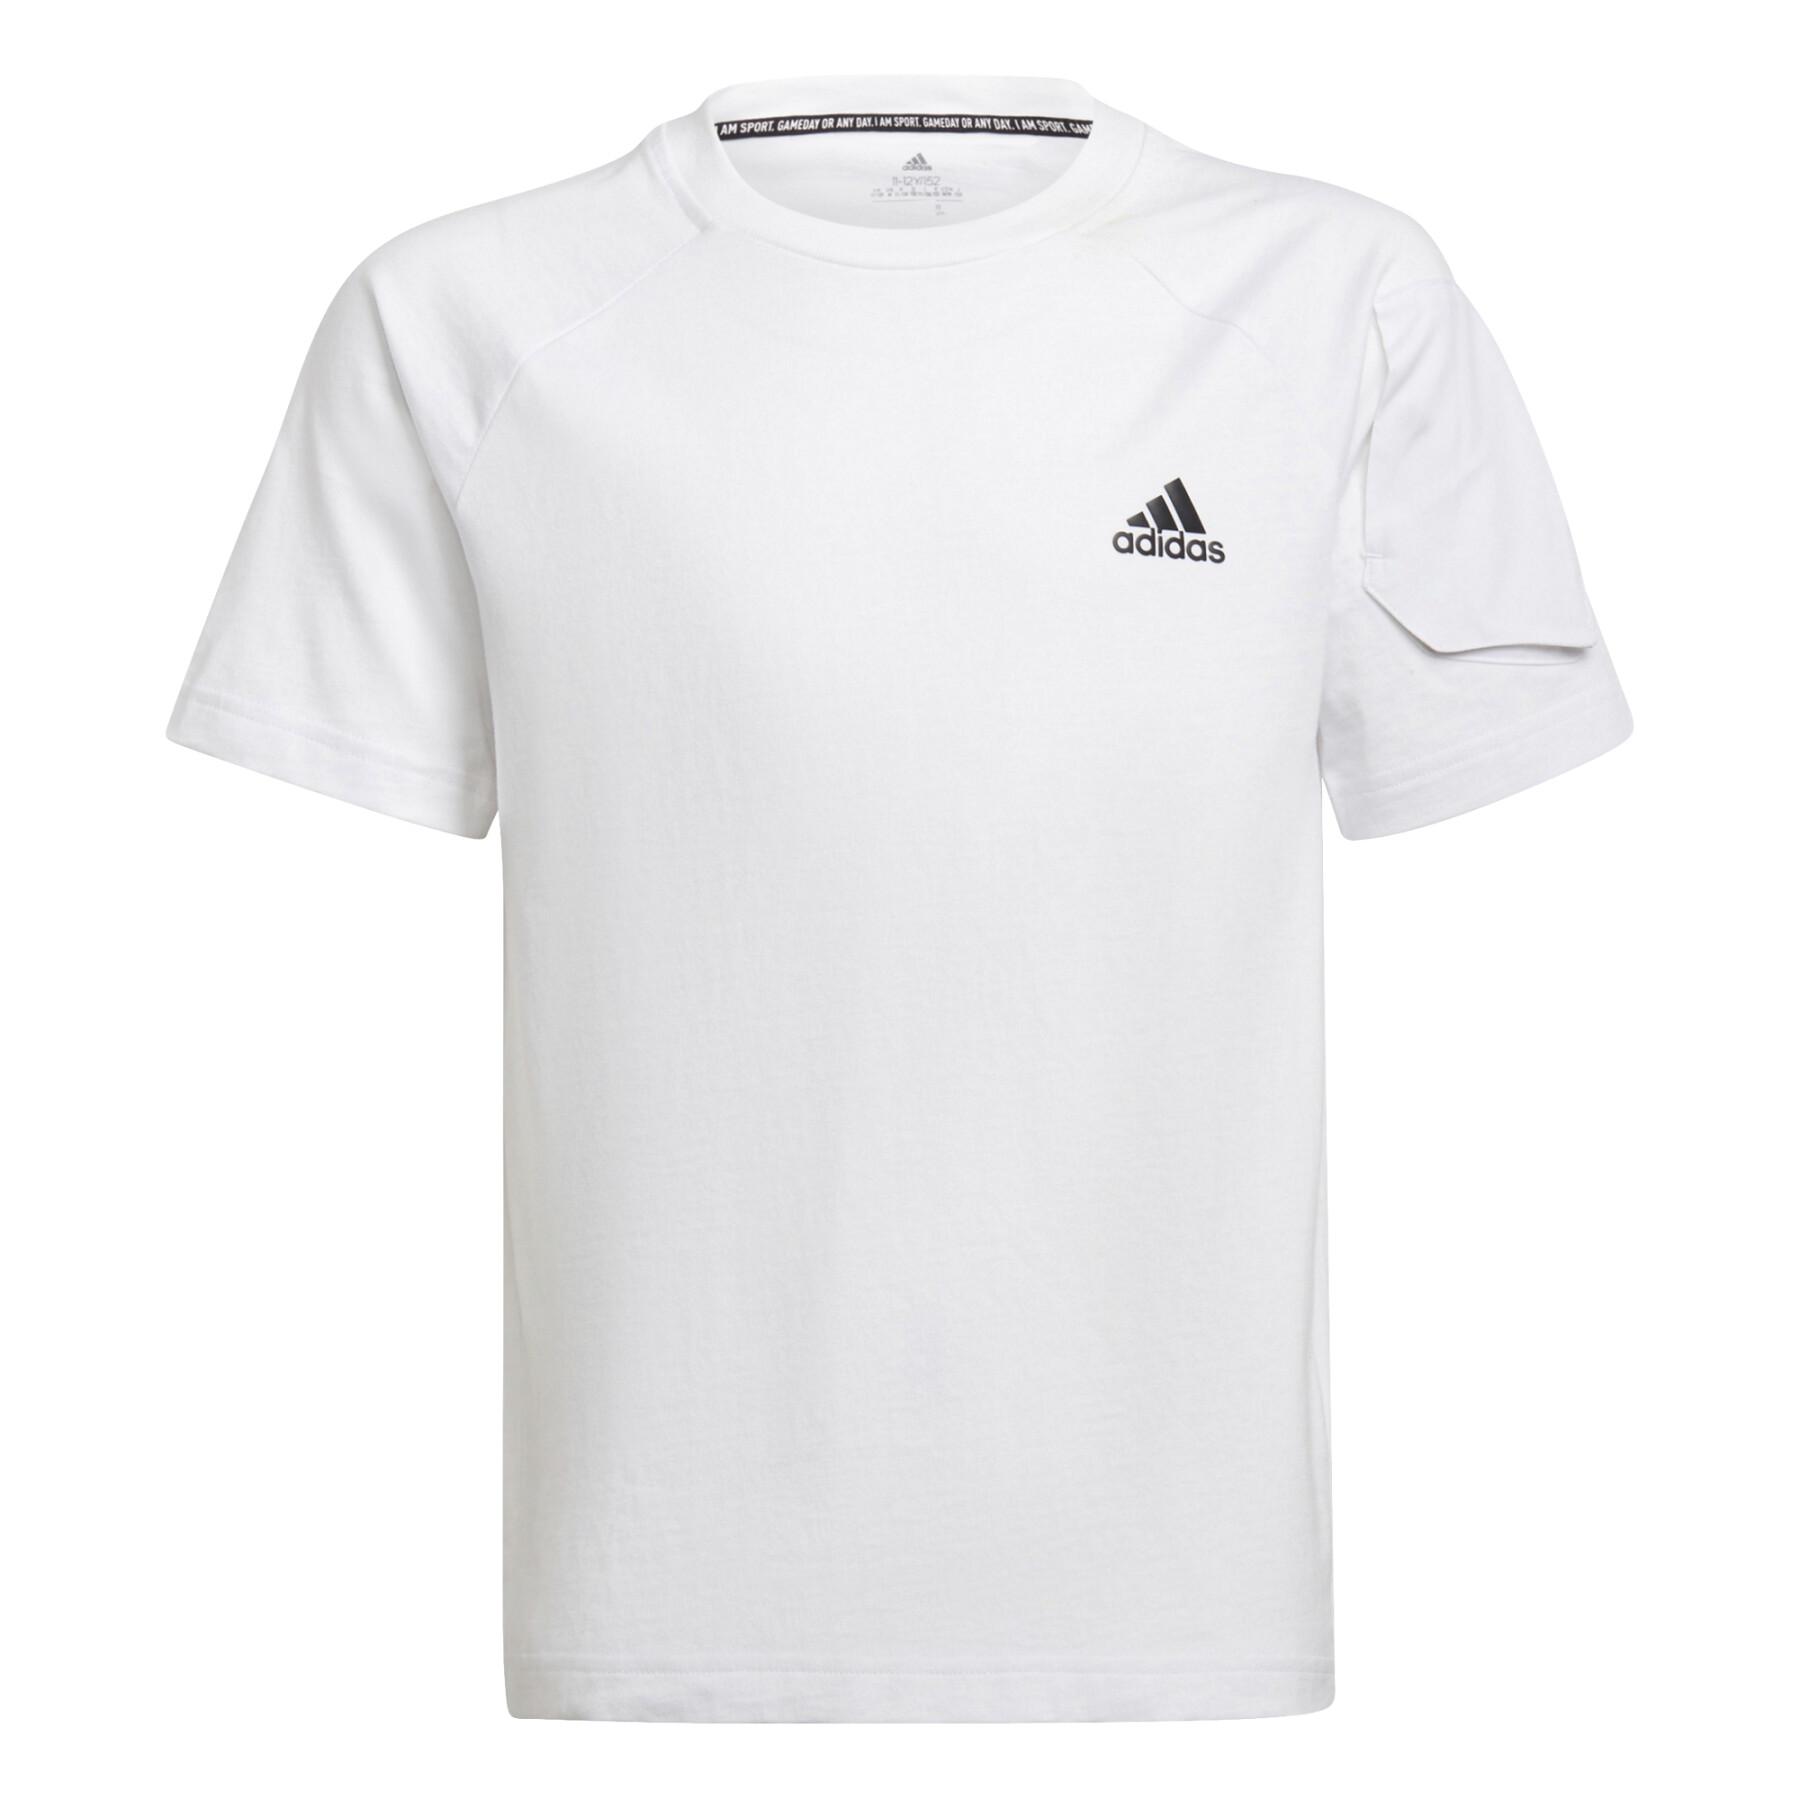 Child's T-shirt adidas Designed For Gameday